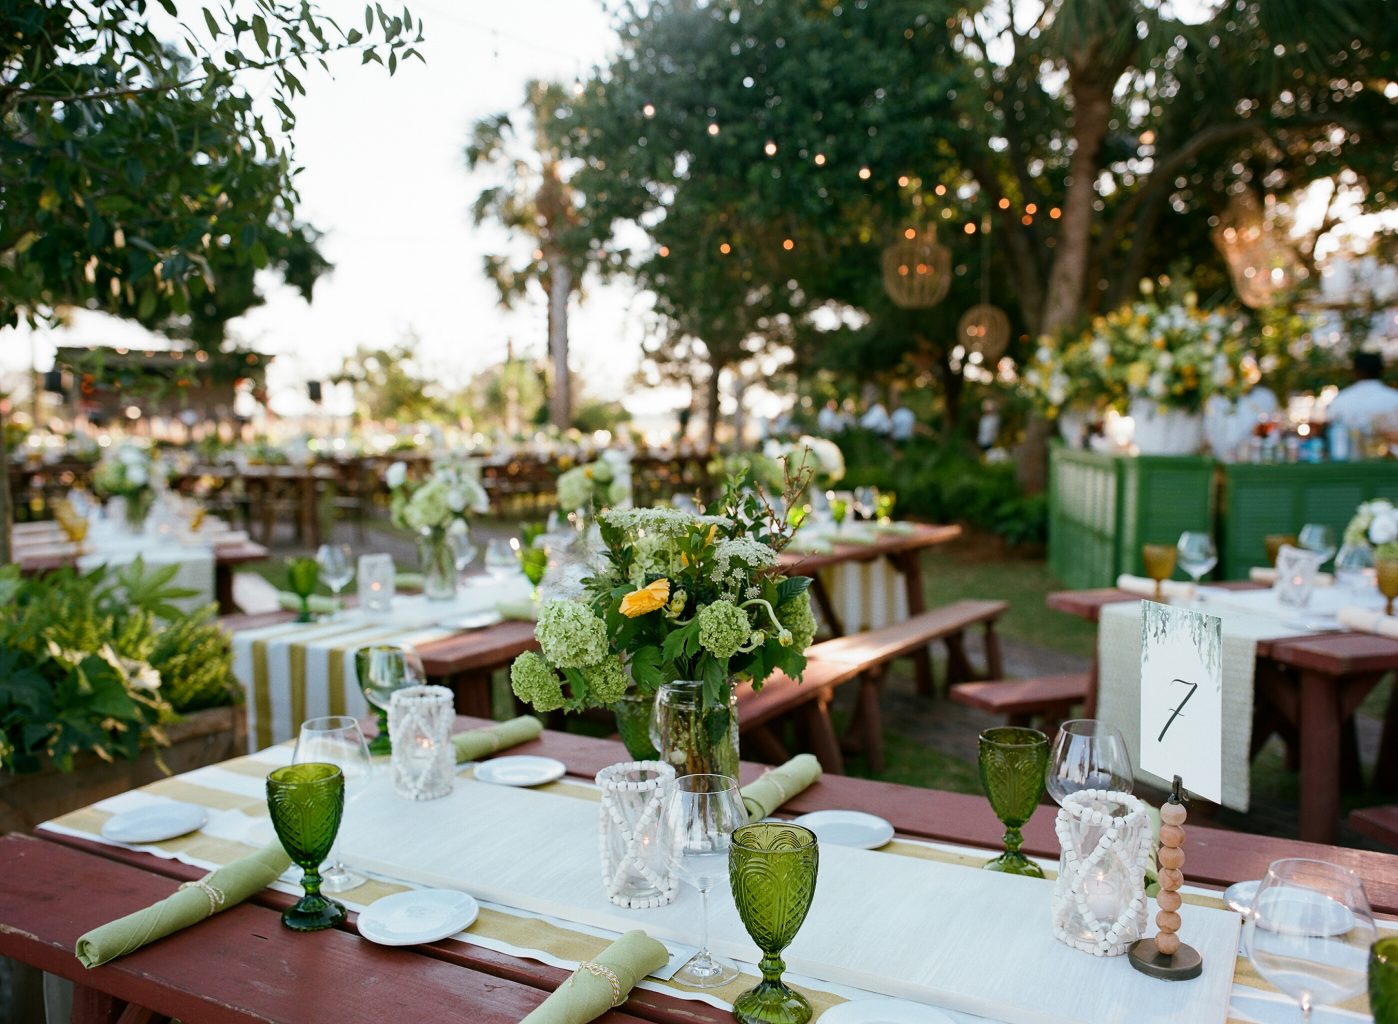 Welcome BBQ party under twinkle lights at Rainbow Island at this Sea Island wedding weekend in Georgia, USA | Photo by Liz Banfield